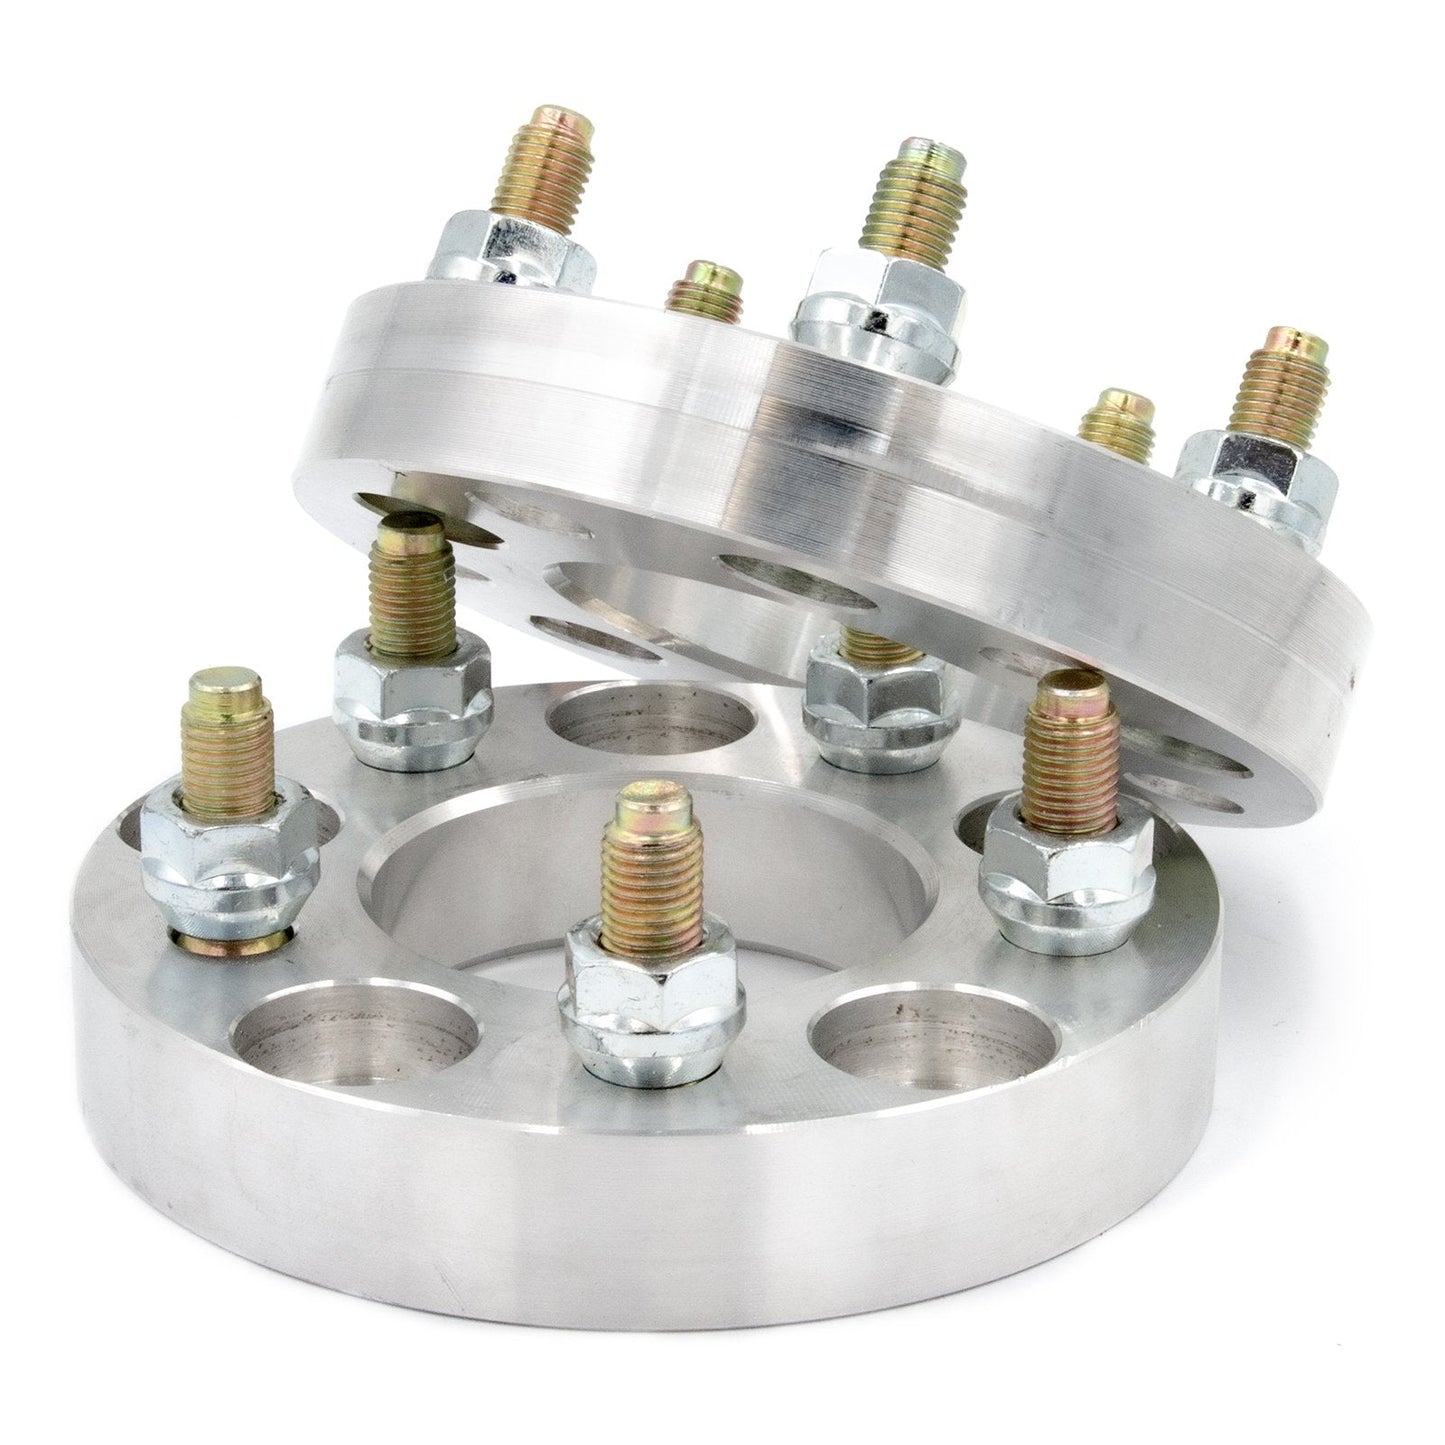 5x4.25" to 5x4.75" Hub Centric Wheel Spacer/Adapter - Thickness: 3/4"- 4"